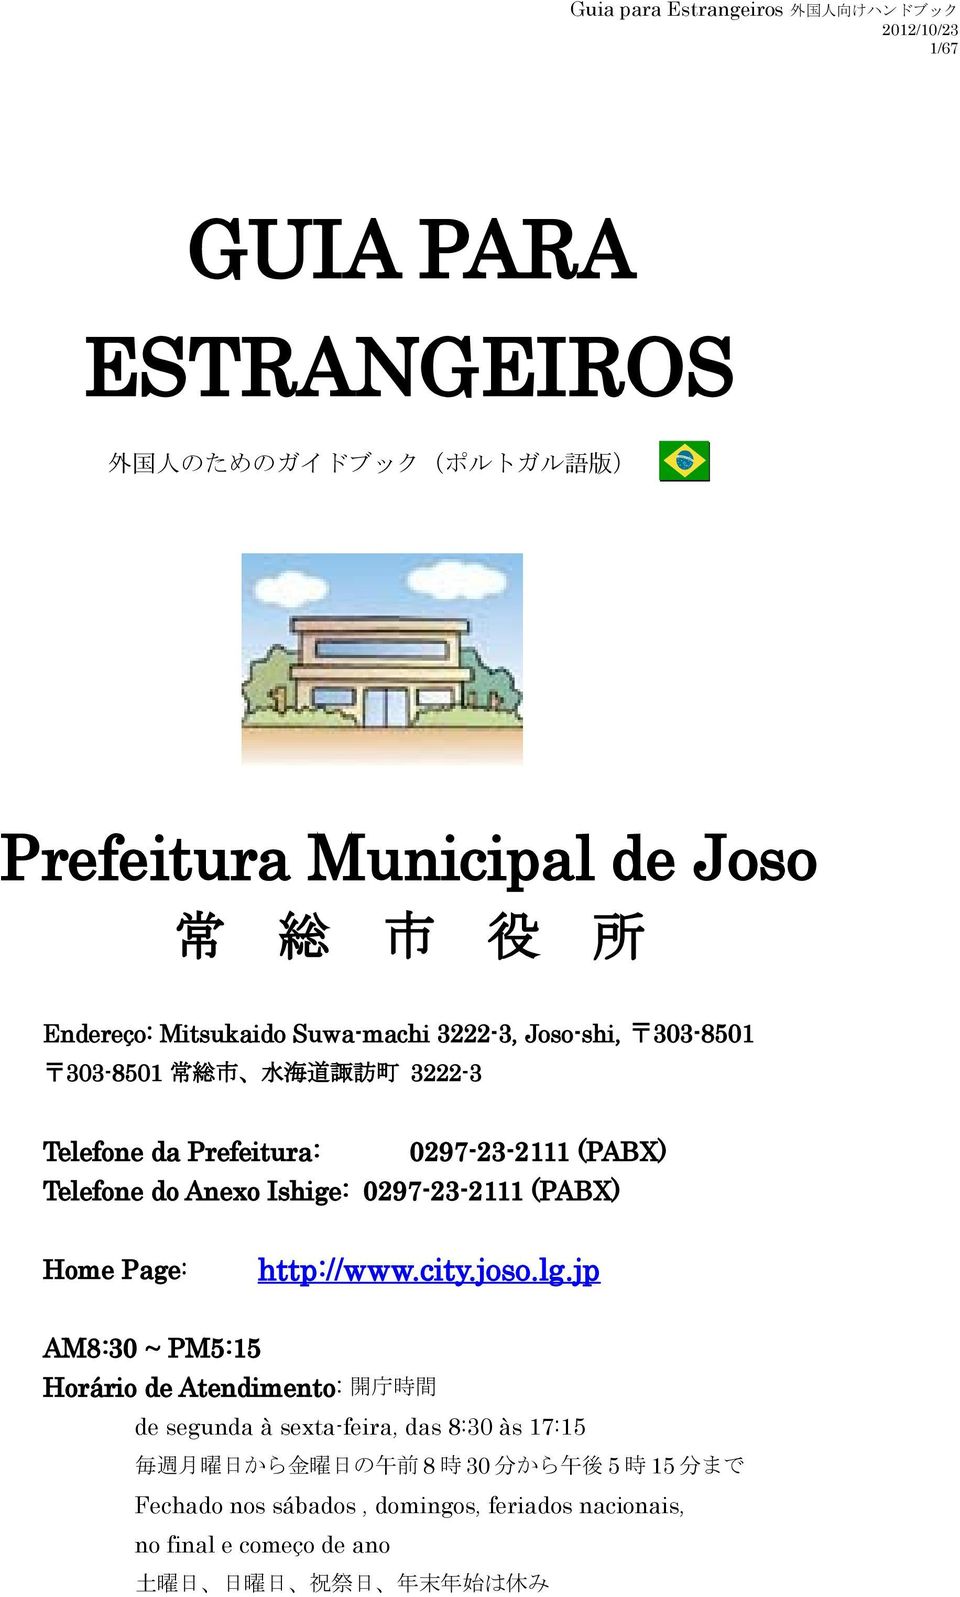 (PABX) Home Page: http://www.city.joso.lg.